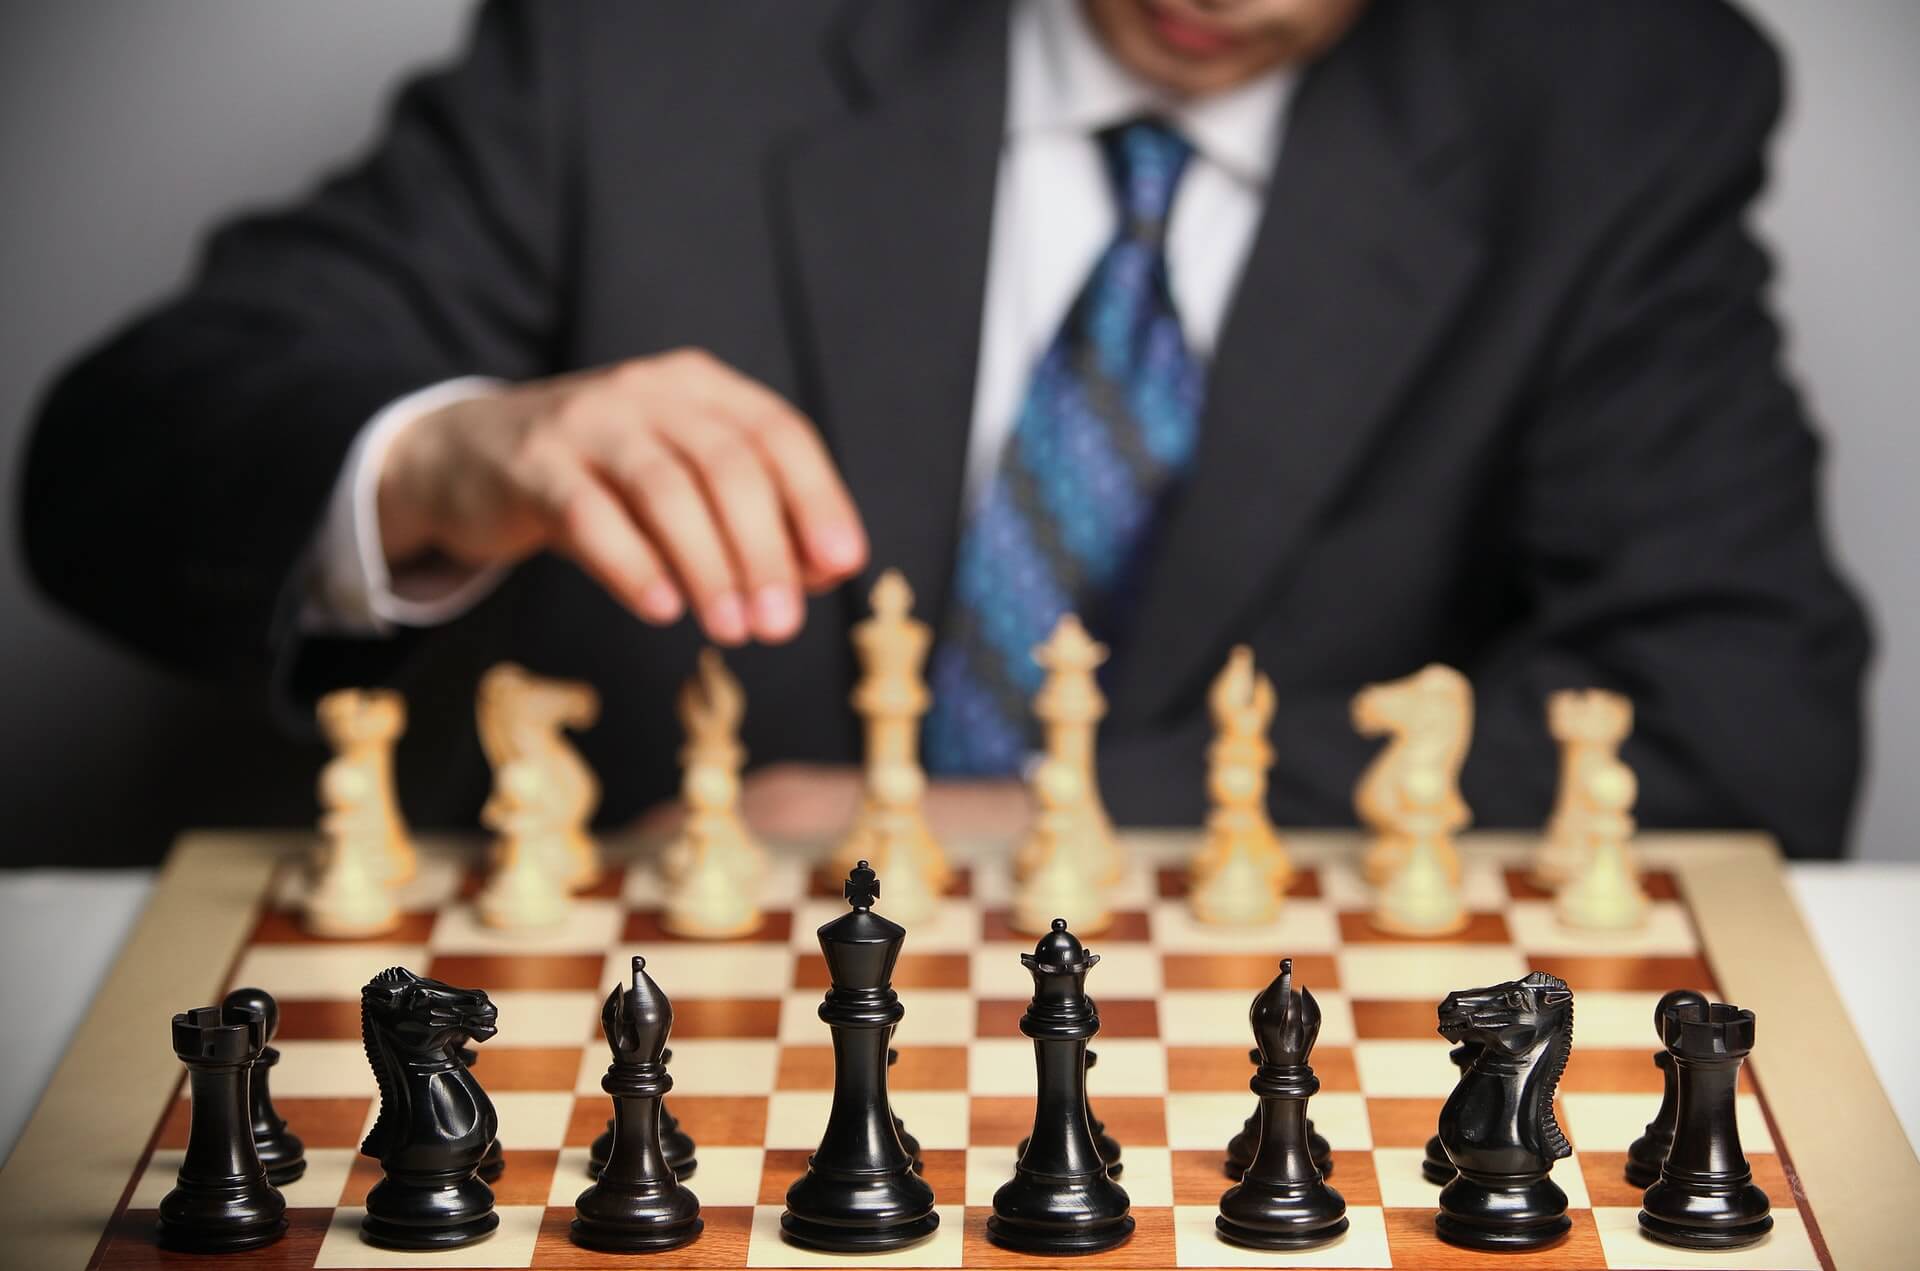 7 Key Activities a Strategy Leader Should Do